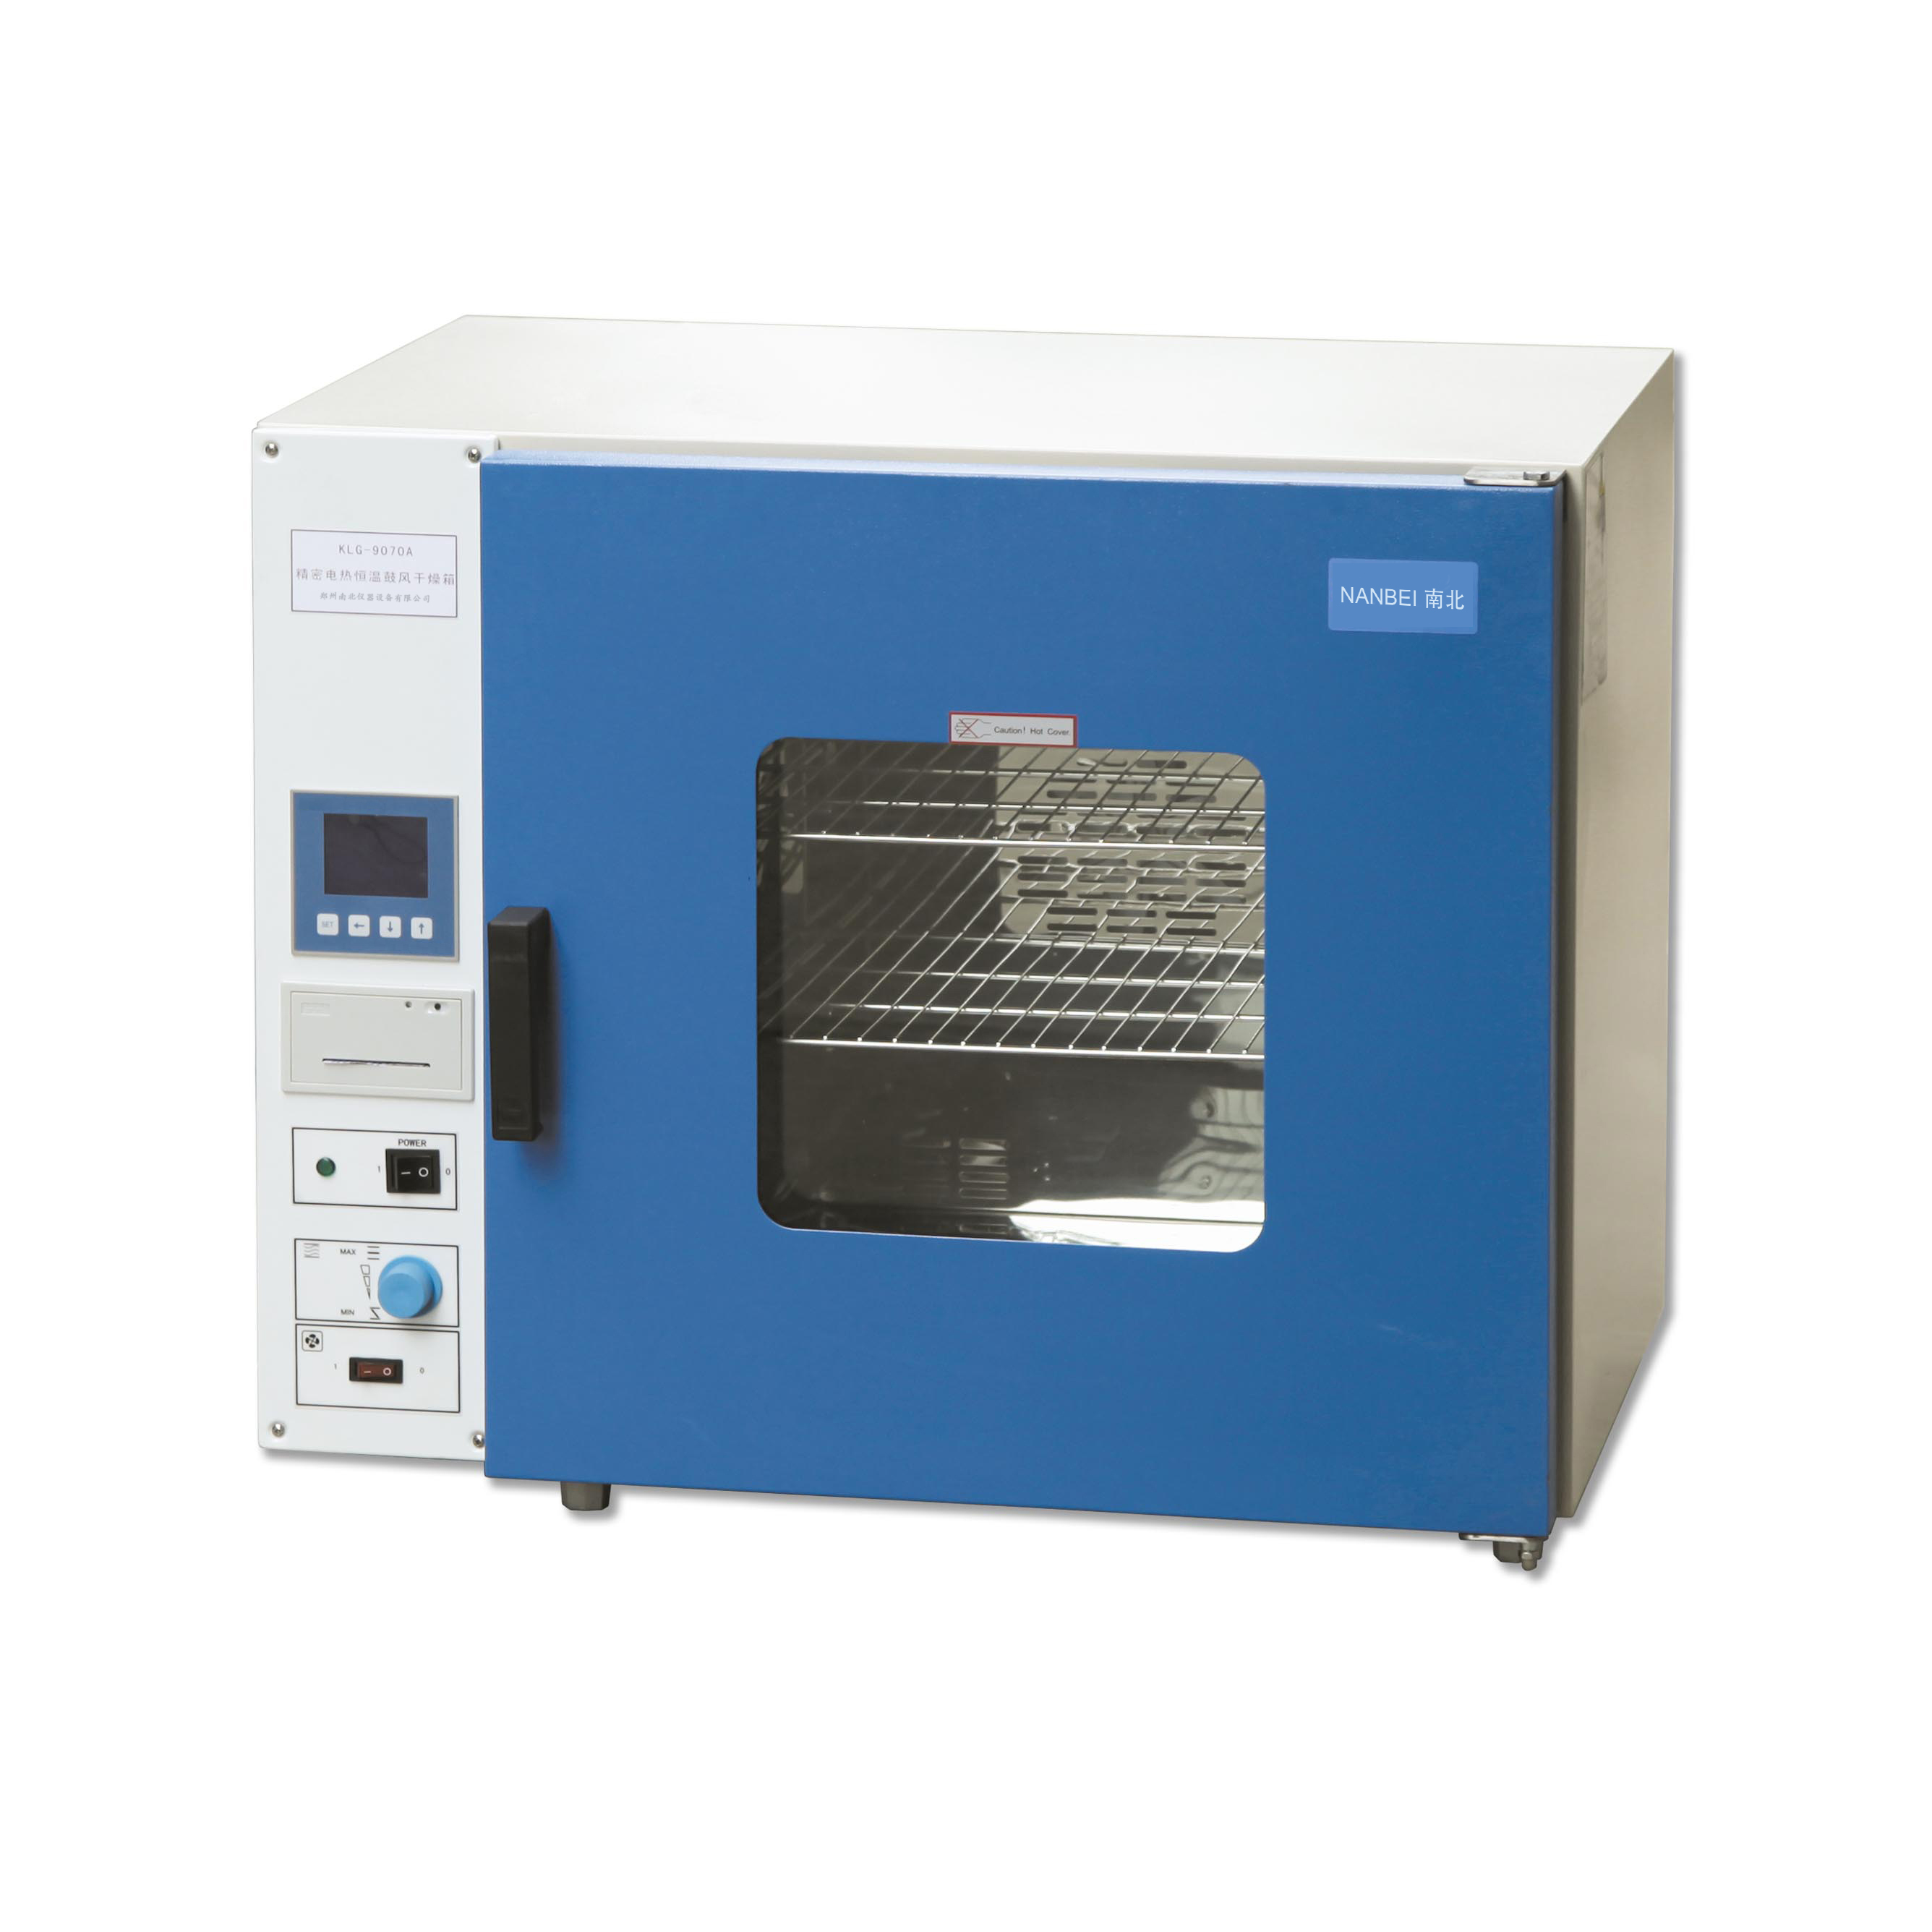 NB-9030AD Electric Blast Drying Oven